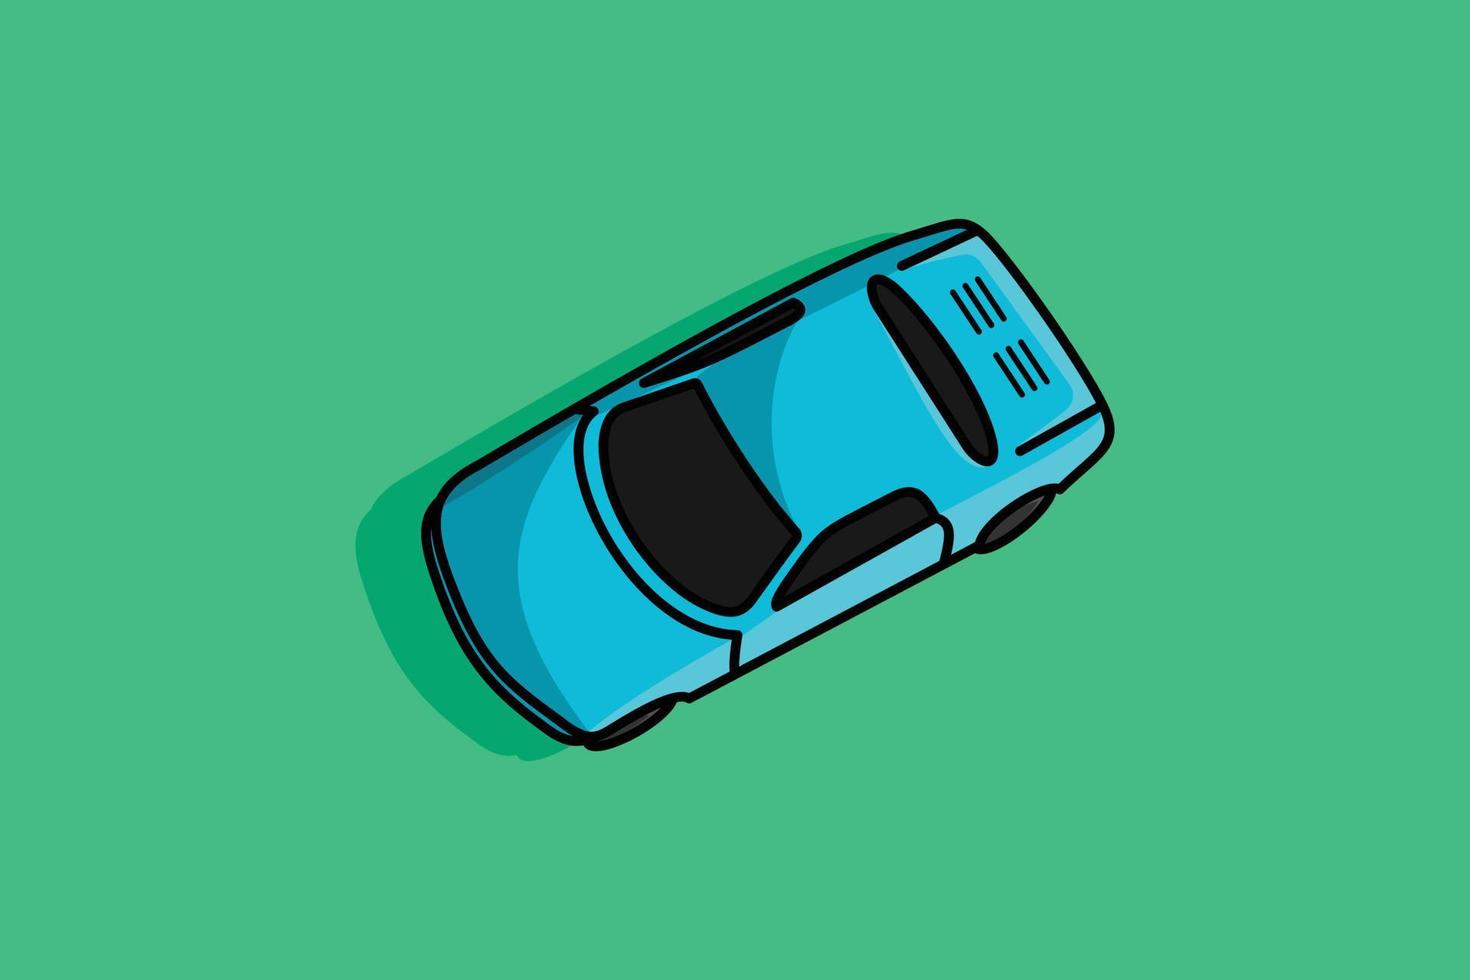 Sports Blue Car up view vector icon illustration. Vehicle transportation icon design concept. Sporty car, vector icon, Racing car, Automotive car, Vehicle repairing, Life style, Luxury life.